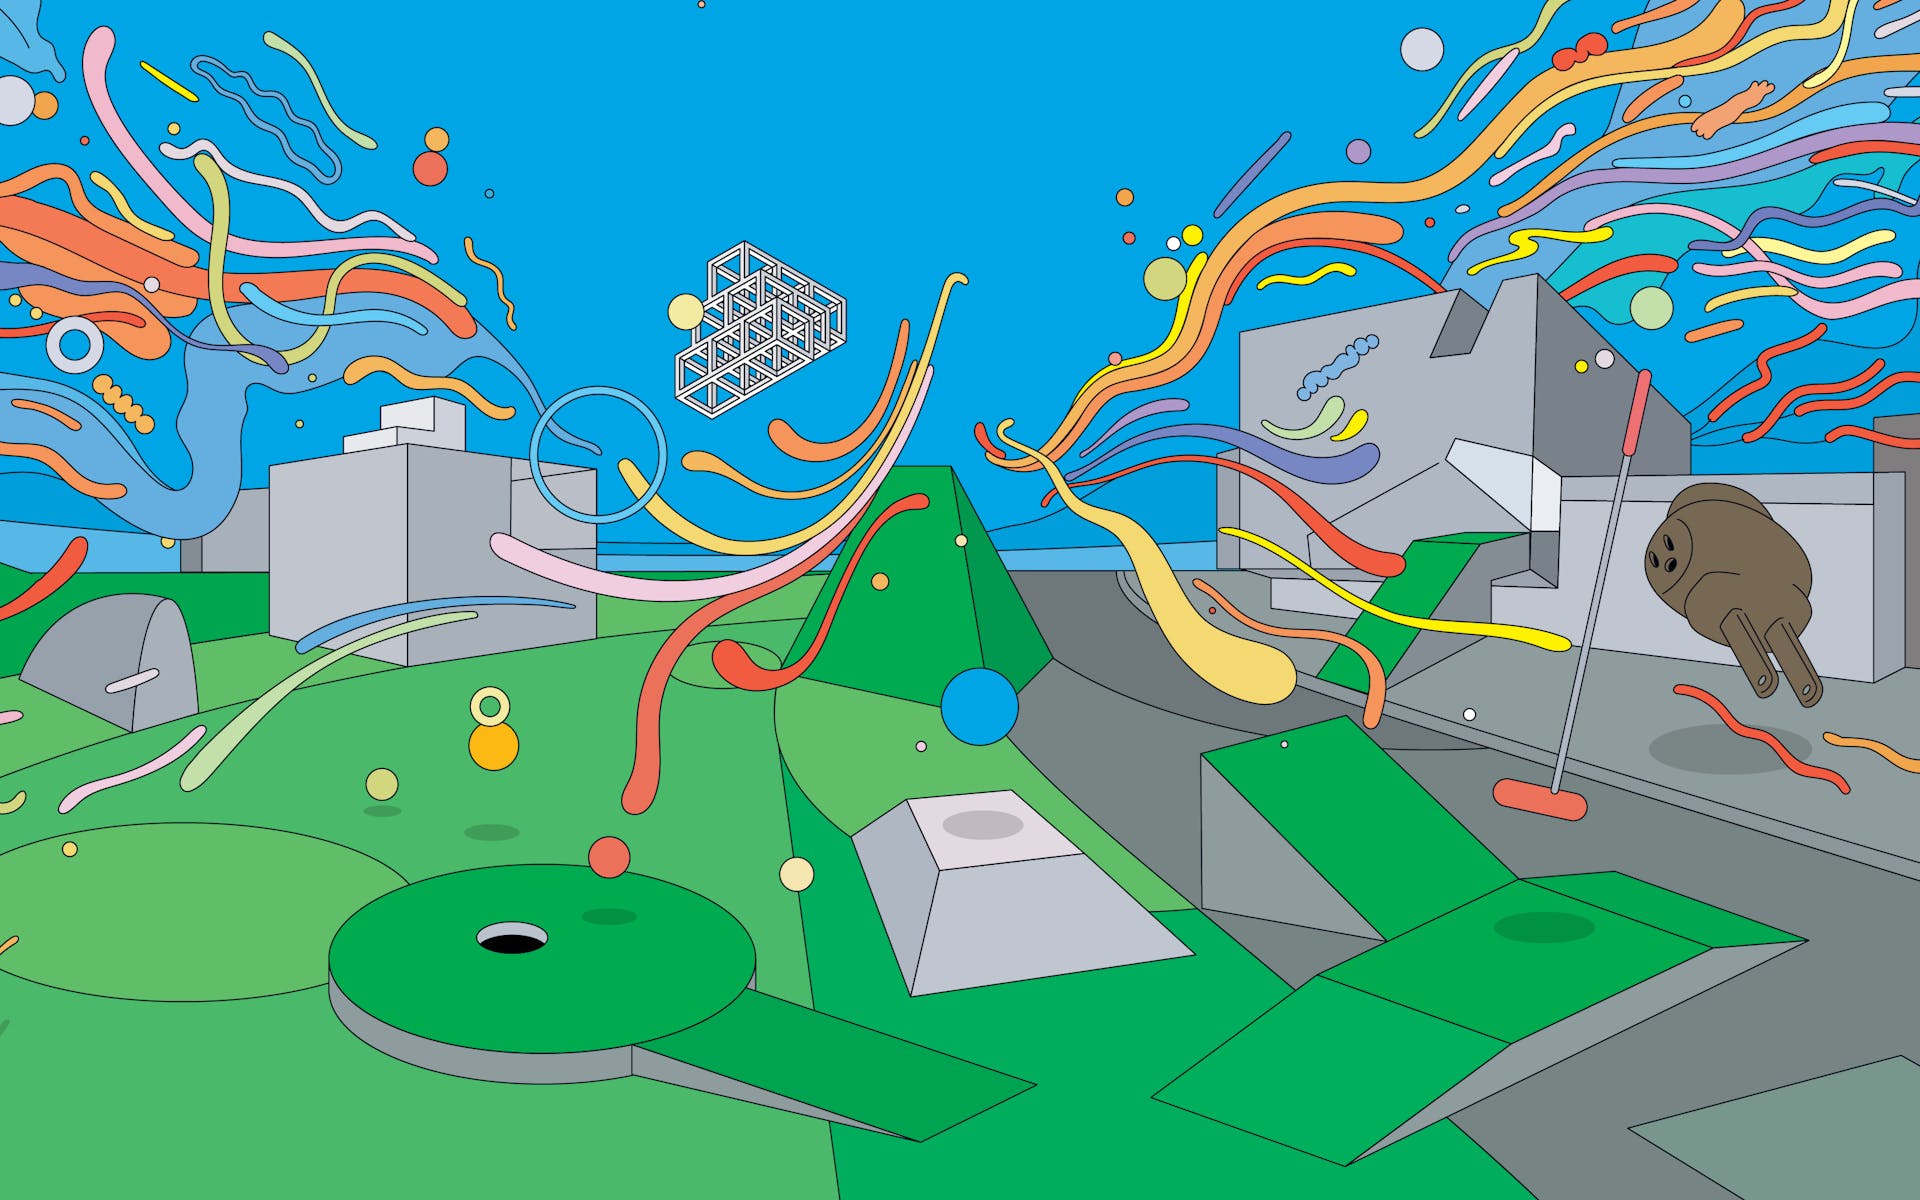 Colorful illustration of Walker building with dozens of floating multicolored balloons and shapes and mini golf course in front